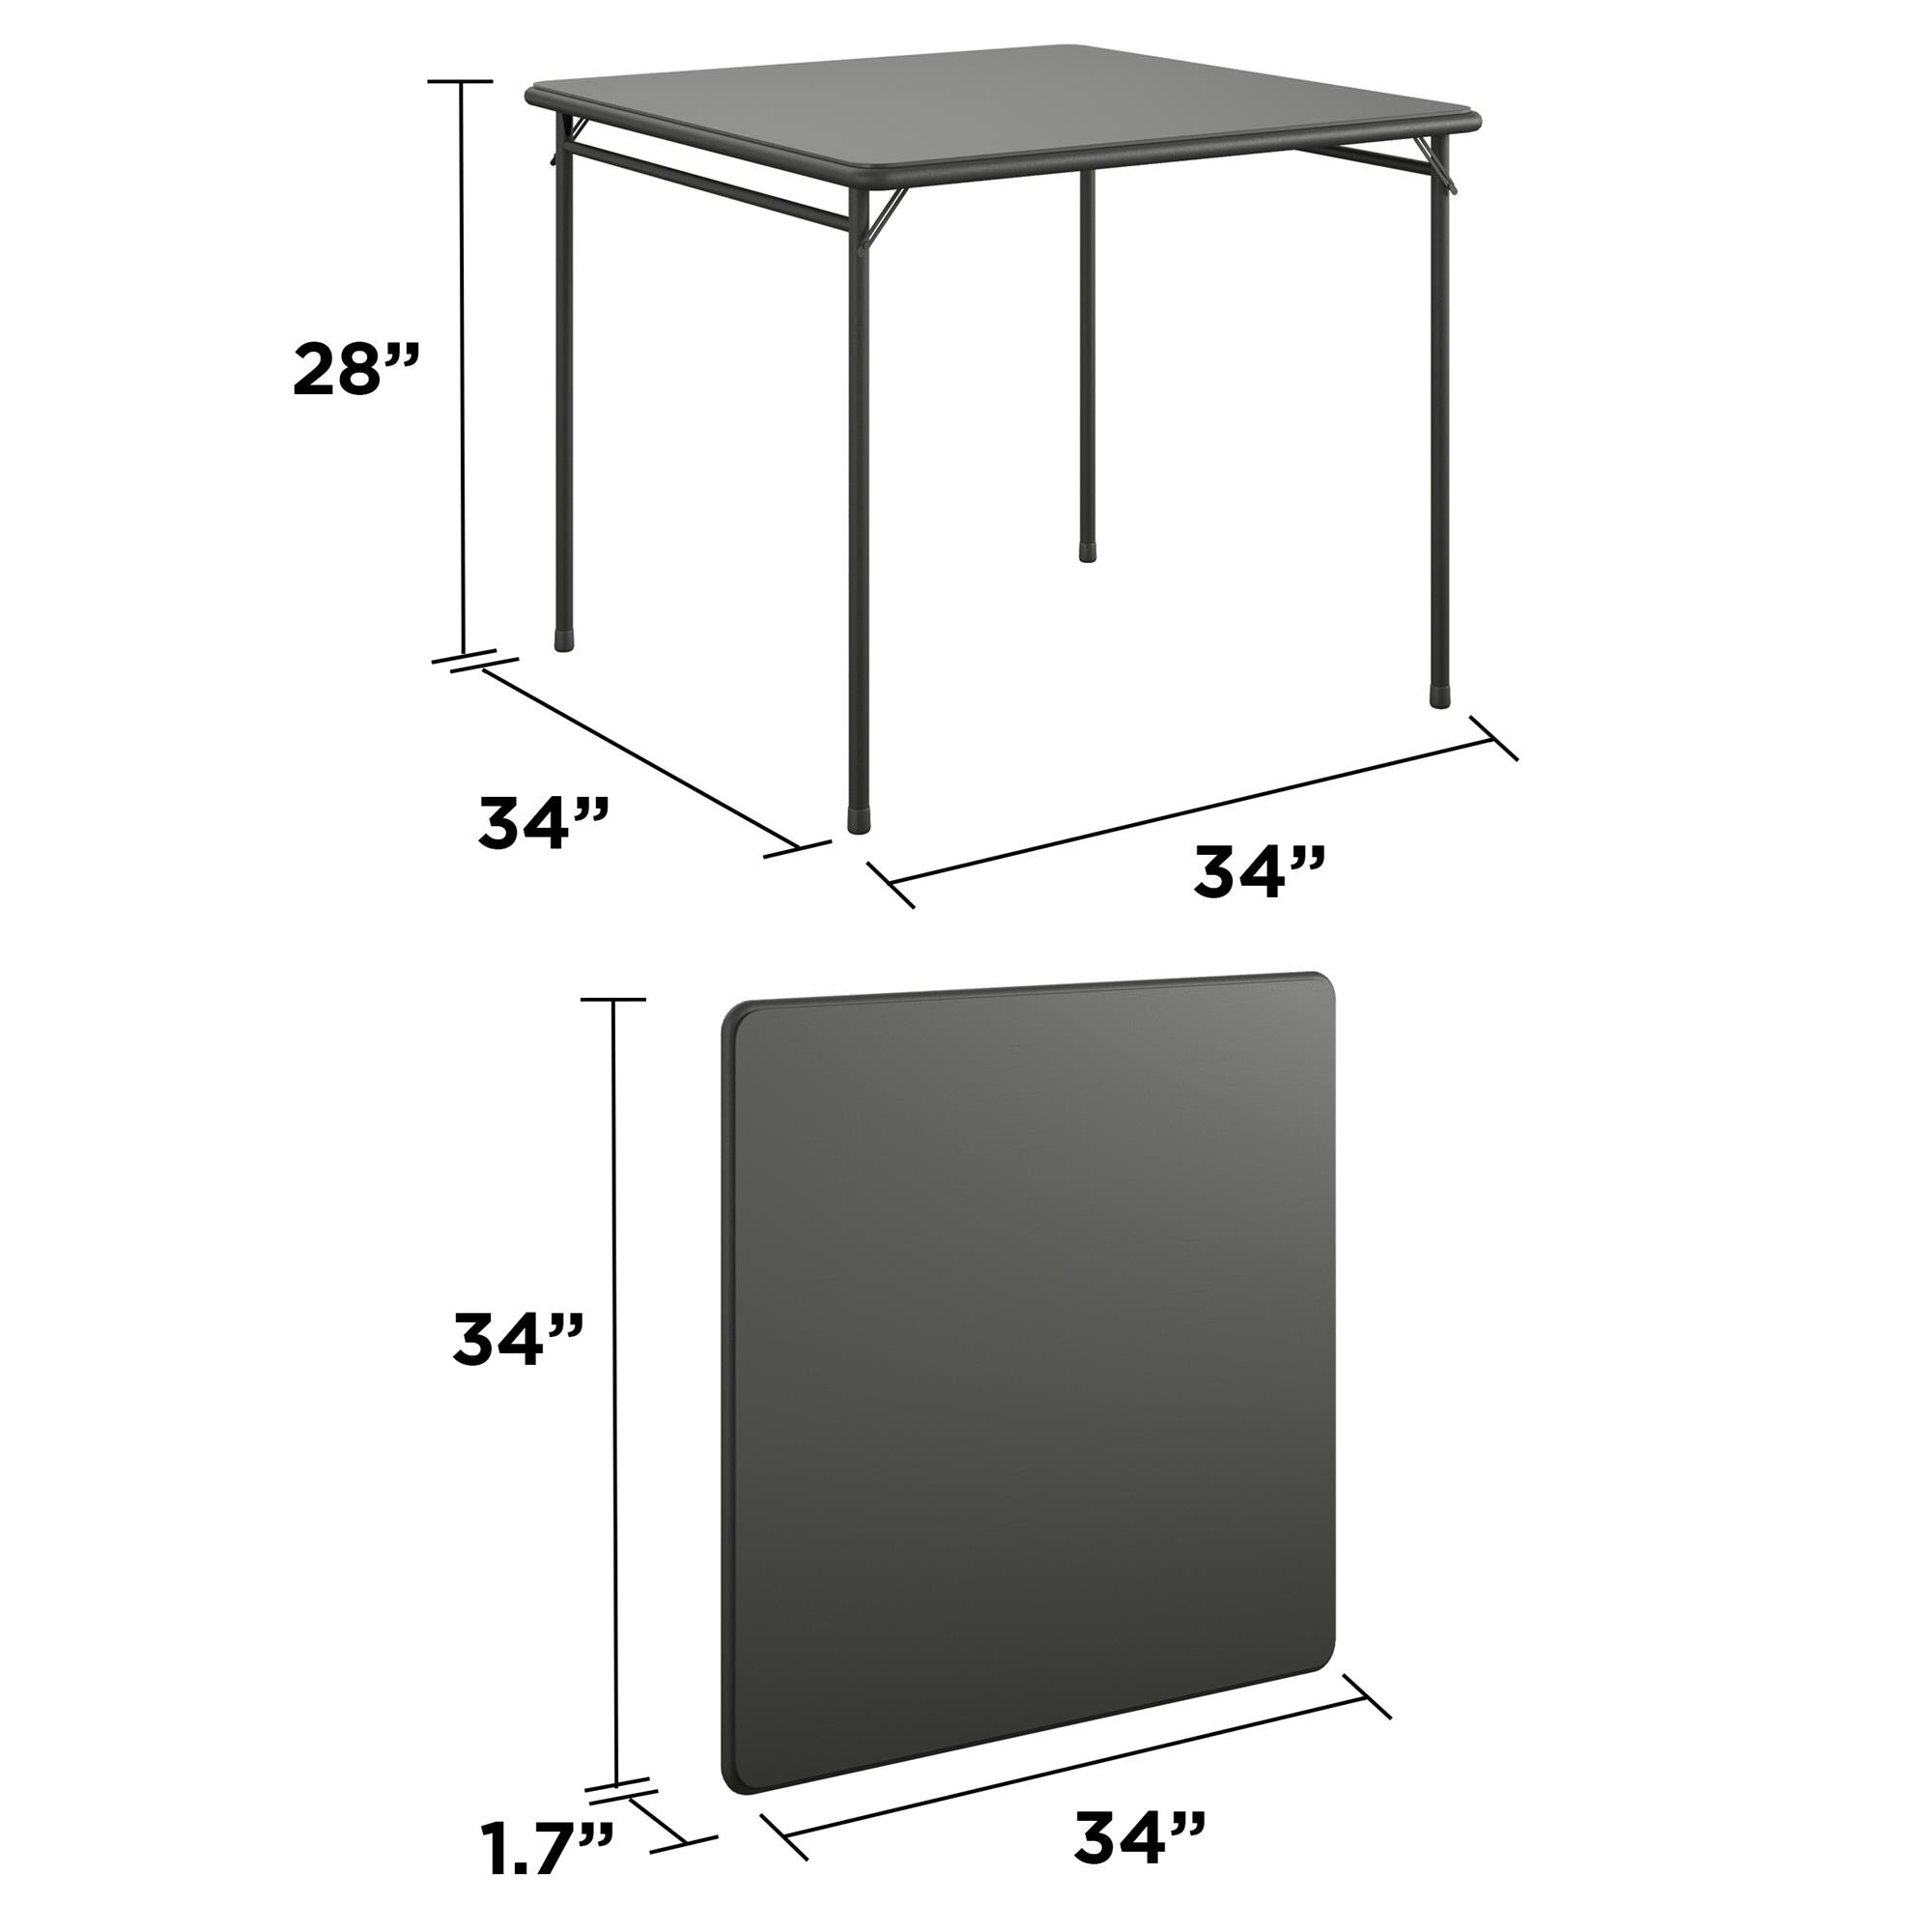 Cosco 3-ft x 3-ft Indoor Square Vinyl Black Folding Dining Table